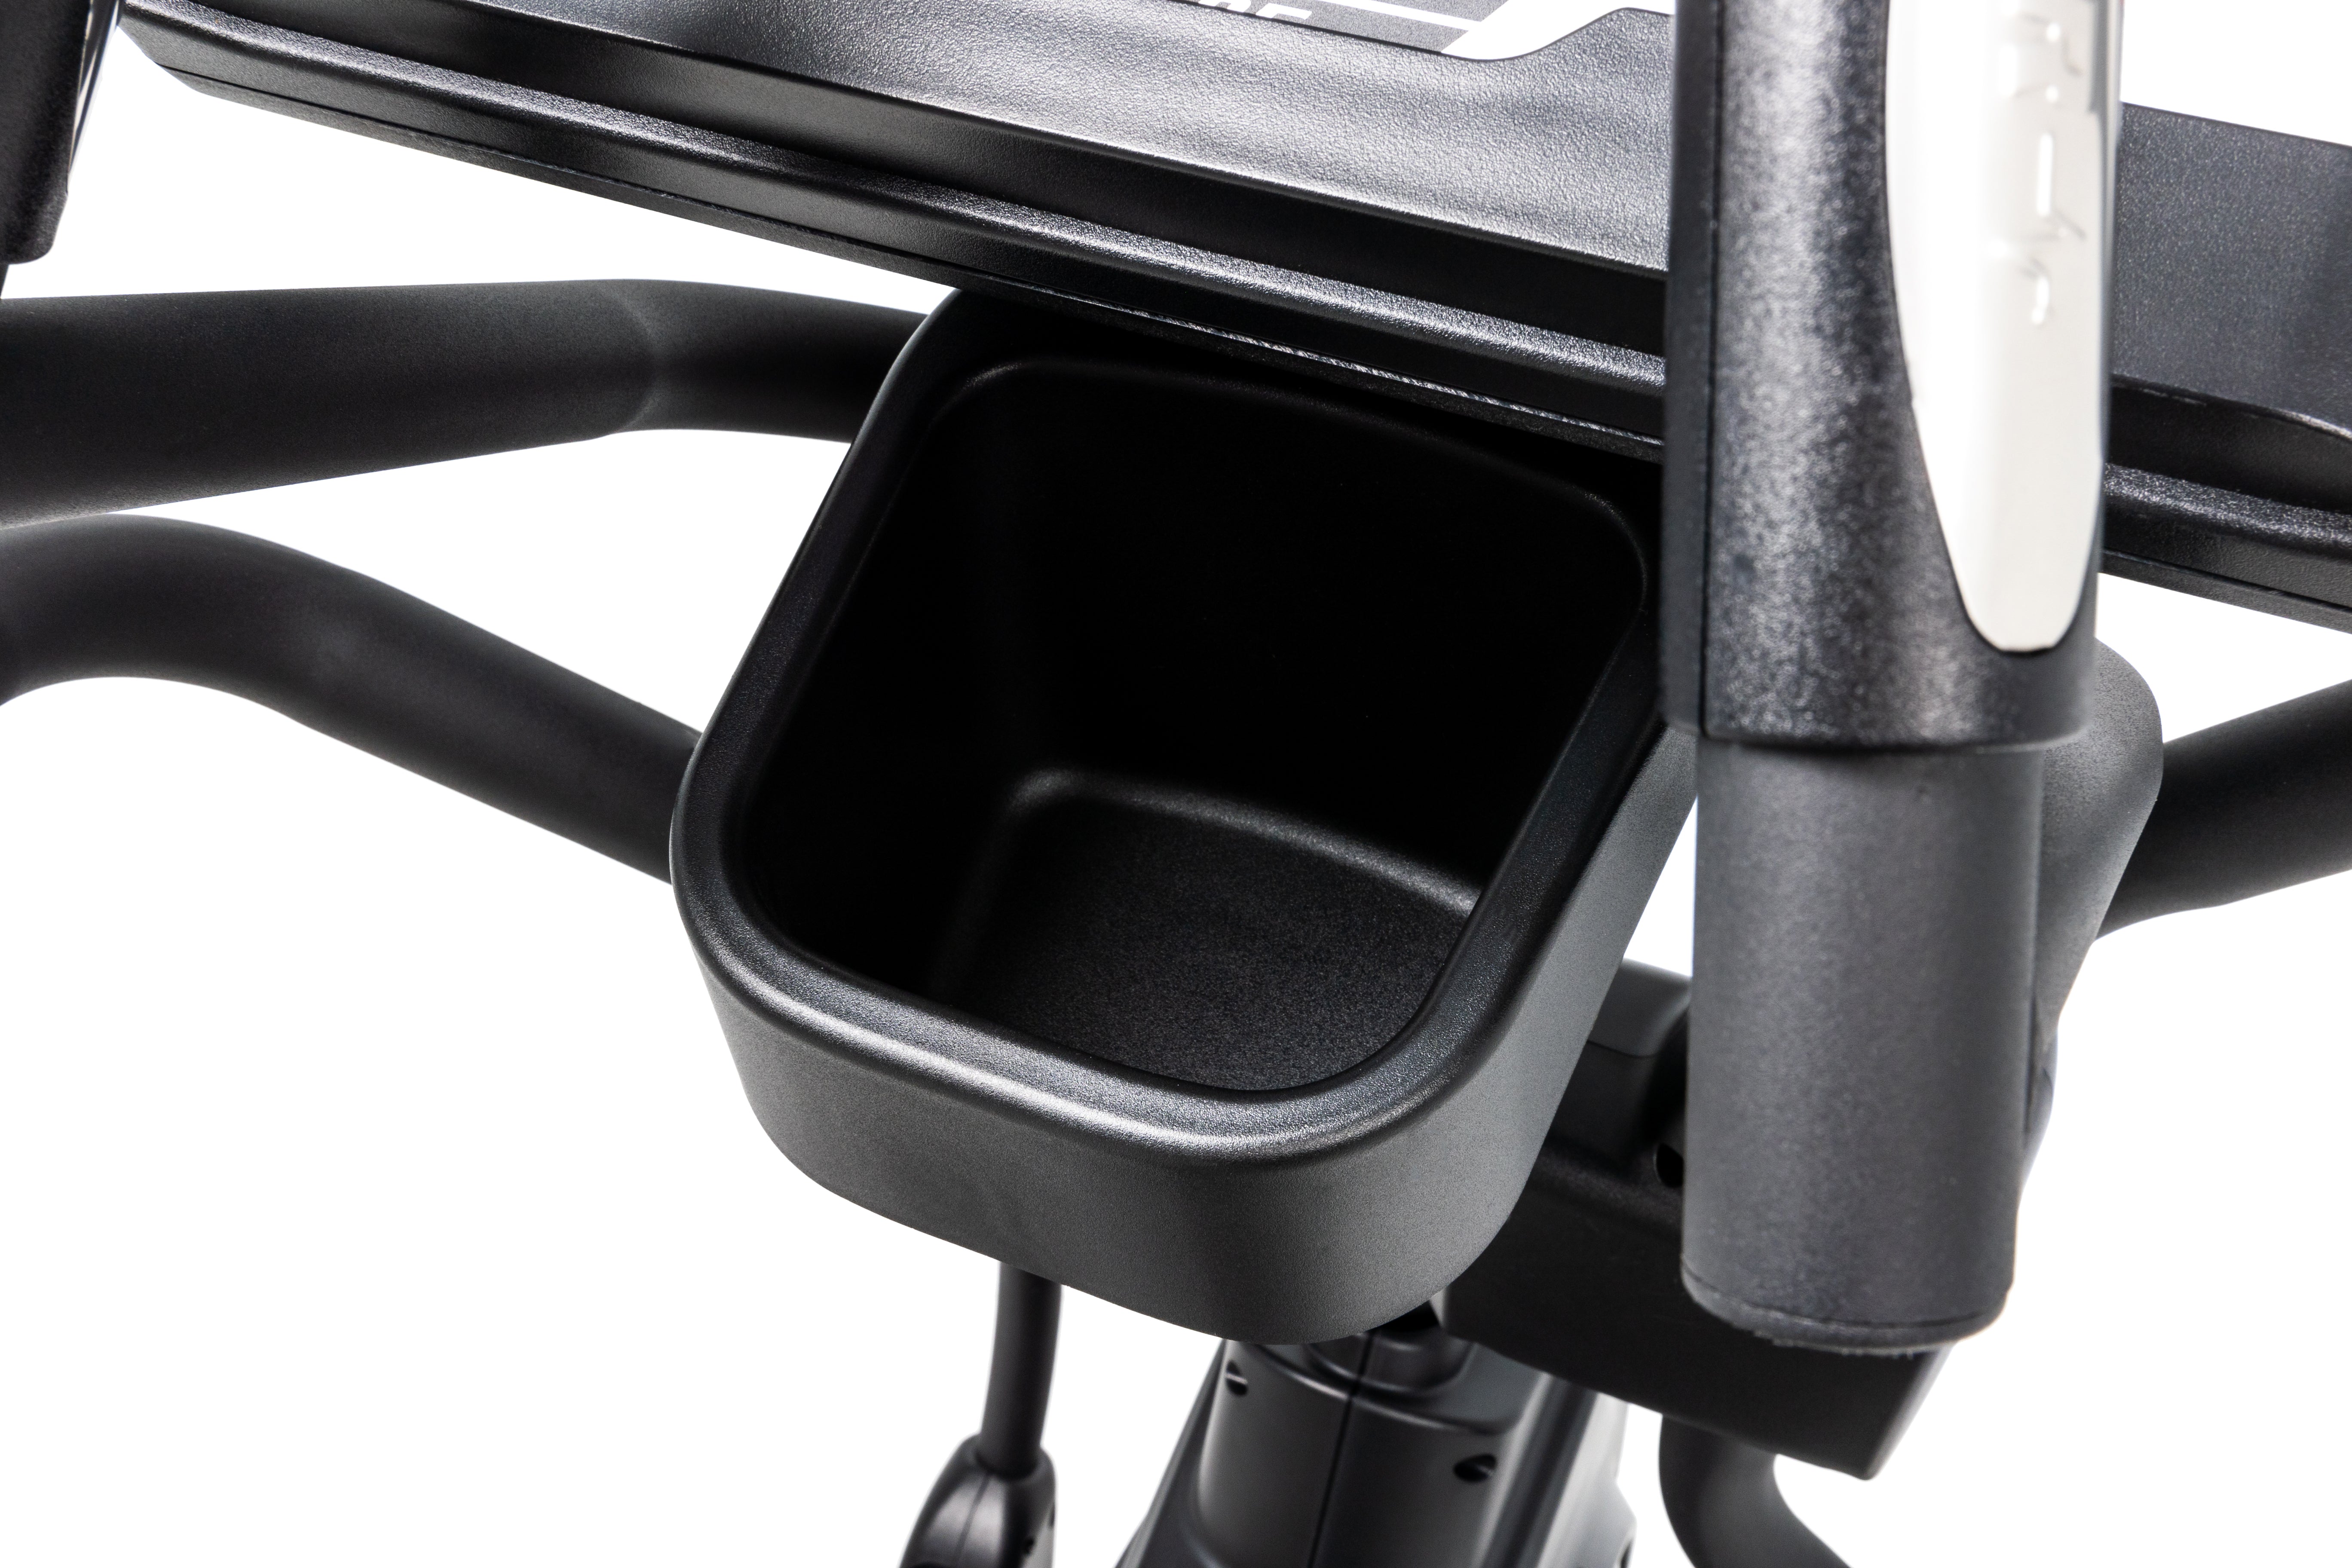 Close-up view of the Sole E95 elliptical trainer's accessory holder, showcasing its deep black storage compartment, a section of its padded foot pedal, and the textured handgrip with a white adjustment button.